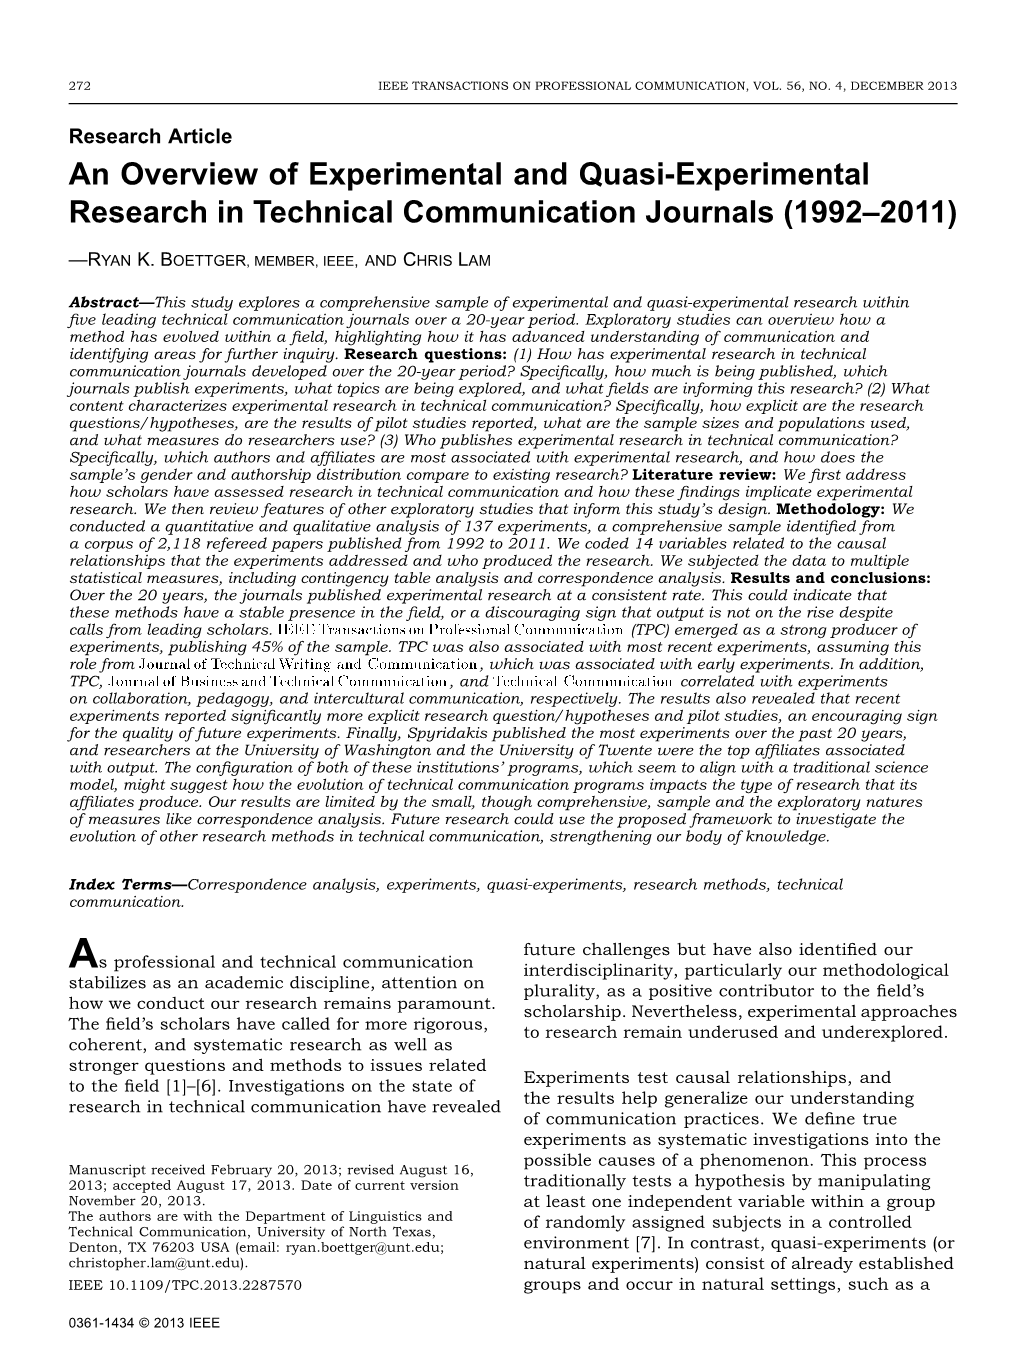 An Overview of Experimental and Quasi-Experimental Research in Technical Communication Journals (1992–2011)